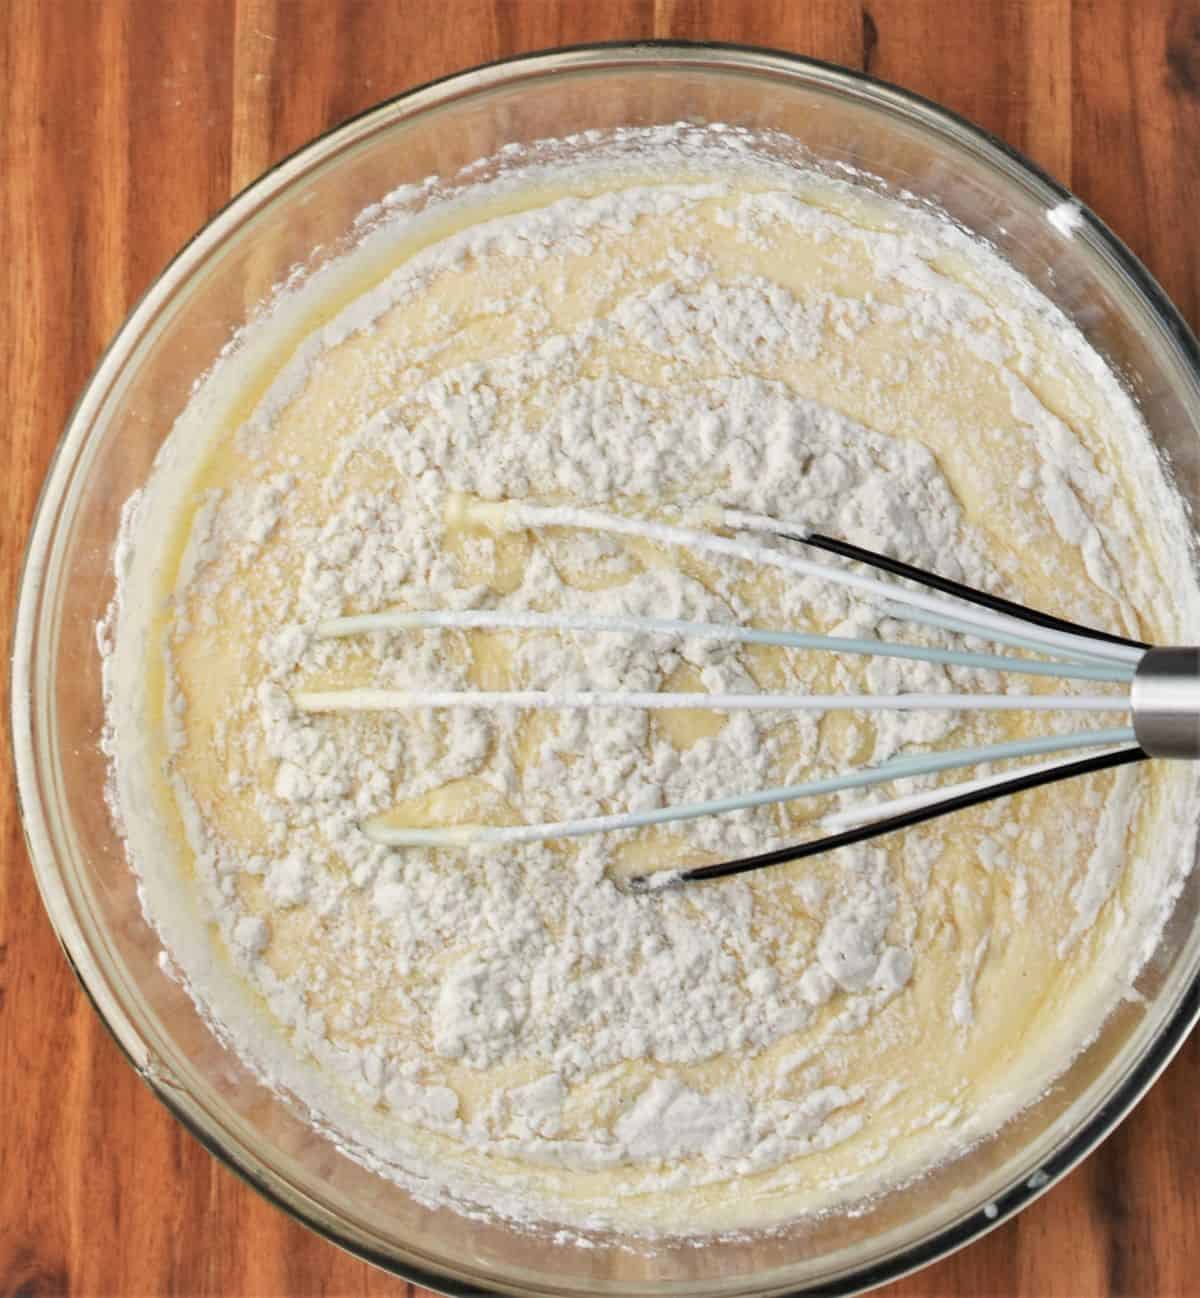 Whisking flour into batter in mixing bowl.